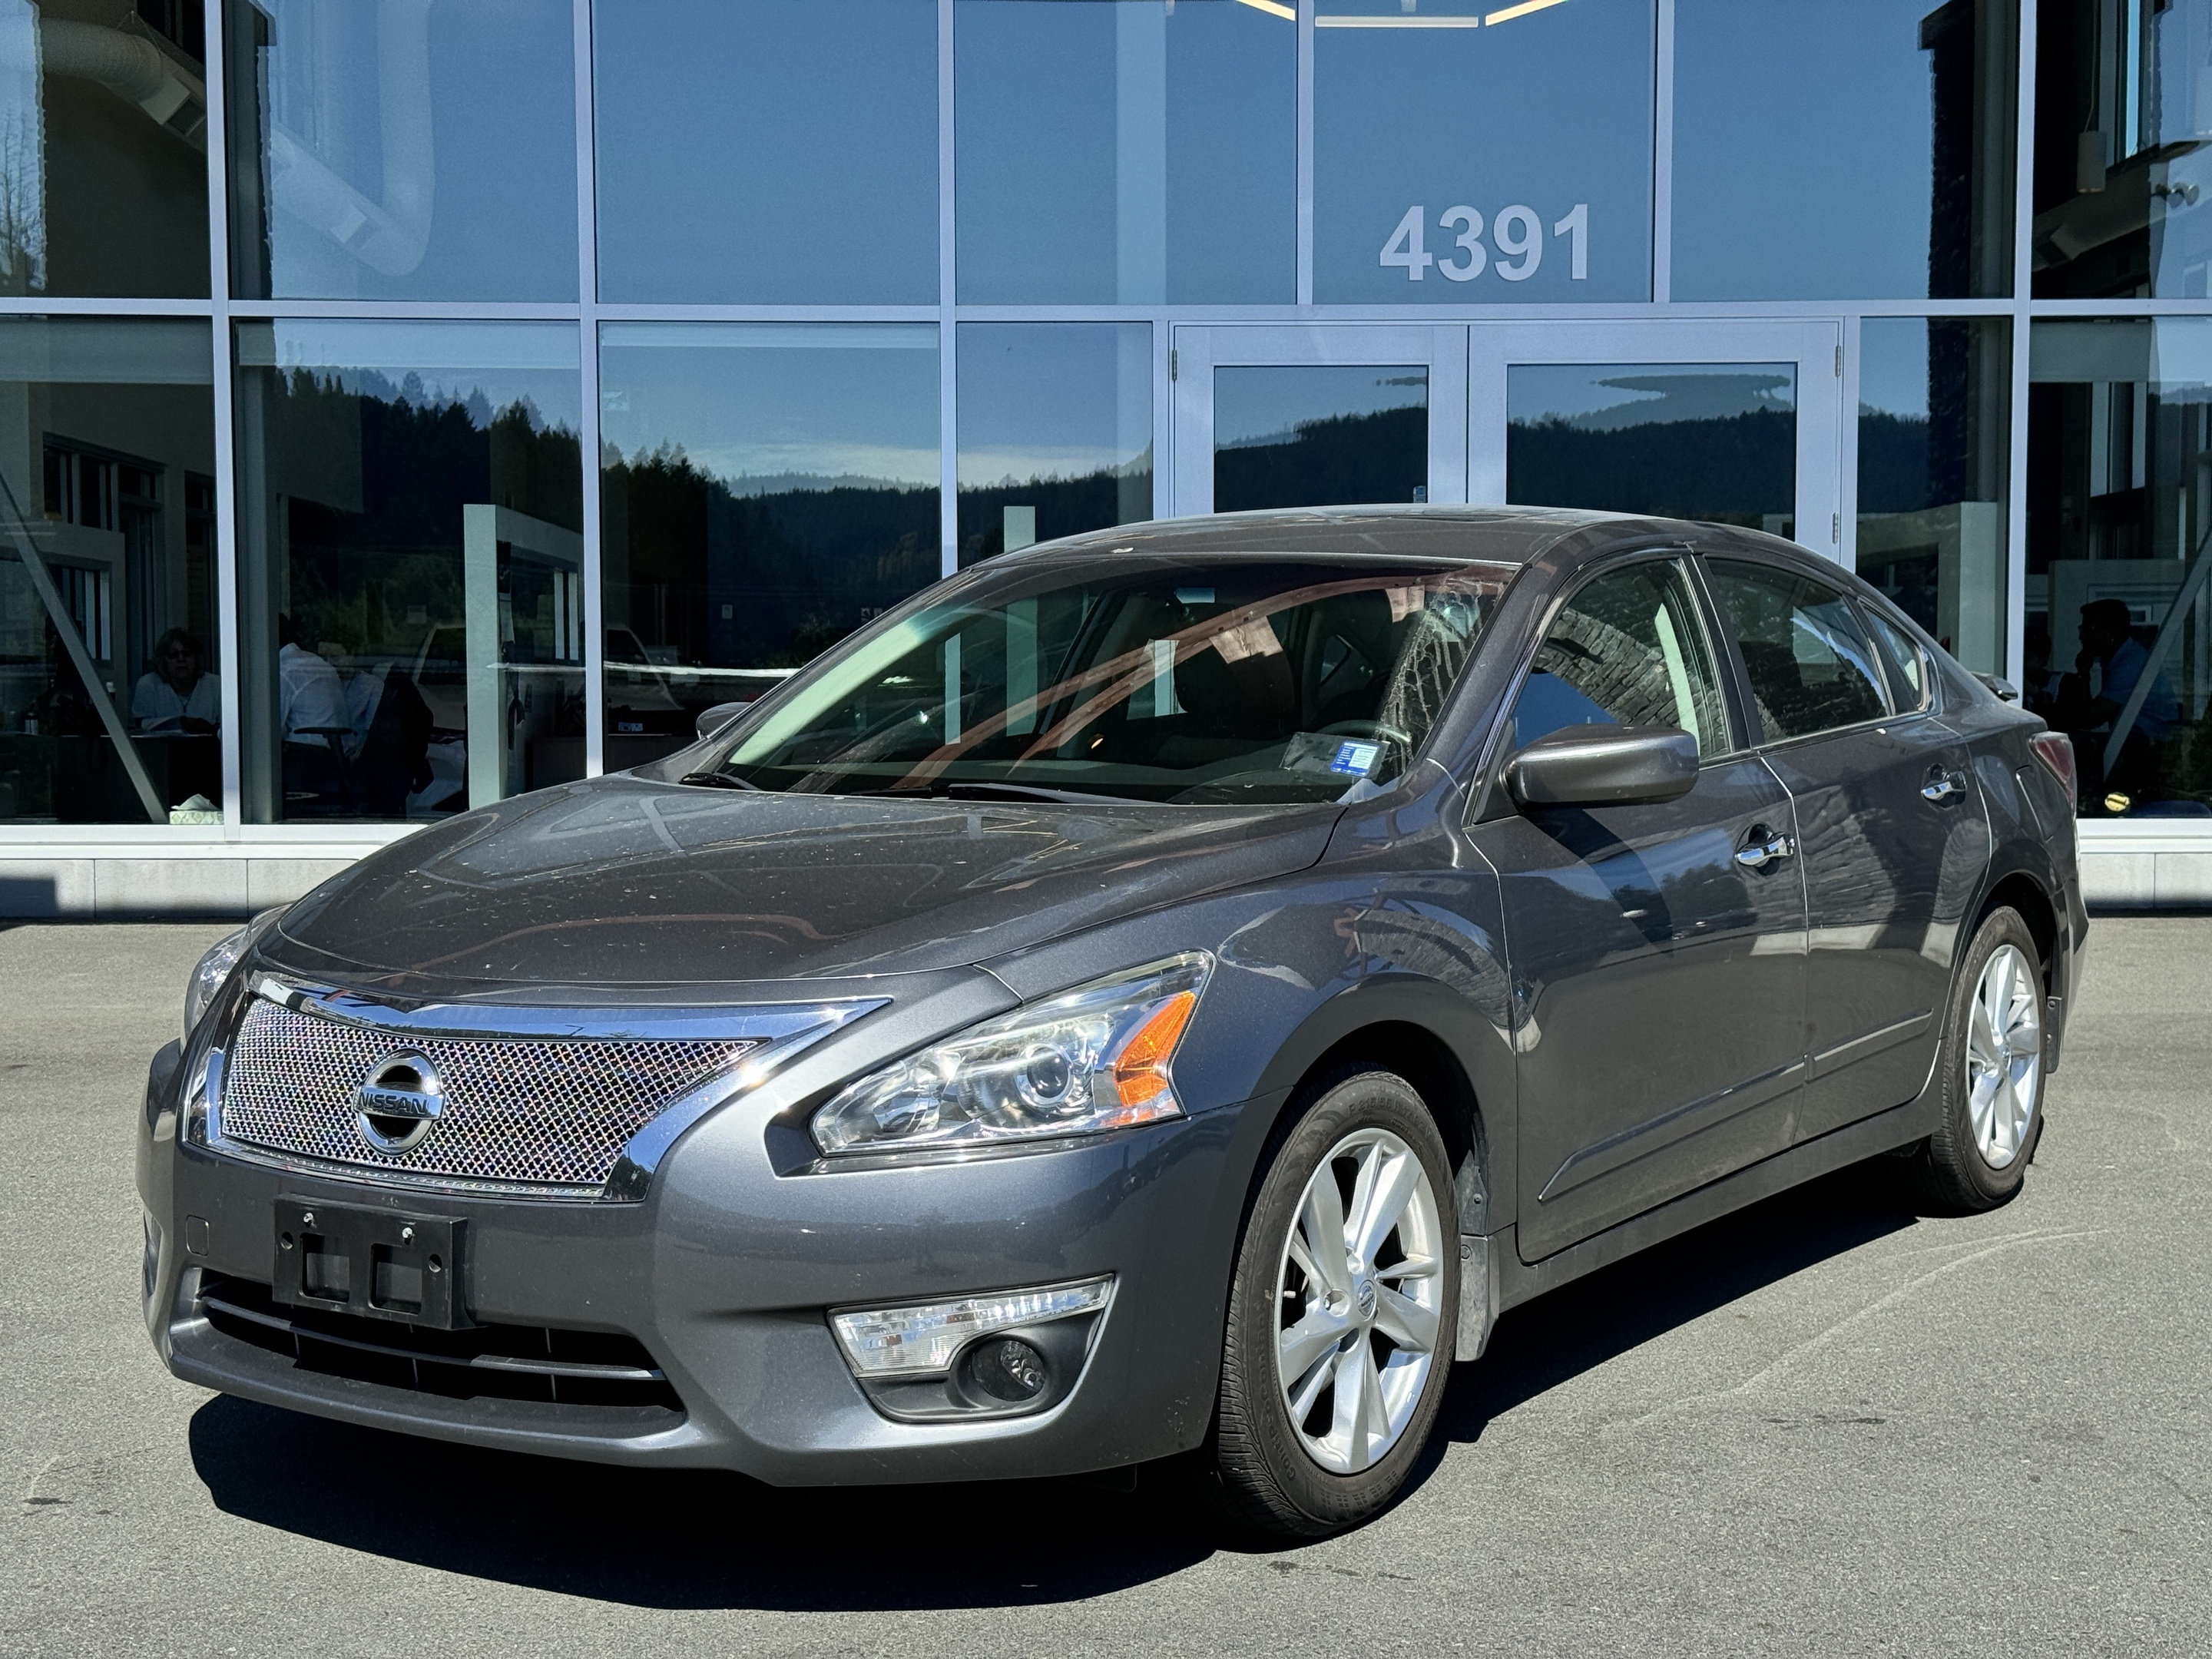 2015 Nissan Altima SV FWD-Keyless Entry,Air Conditioning